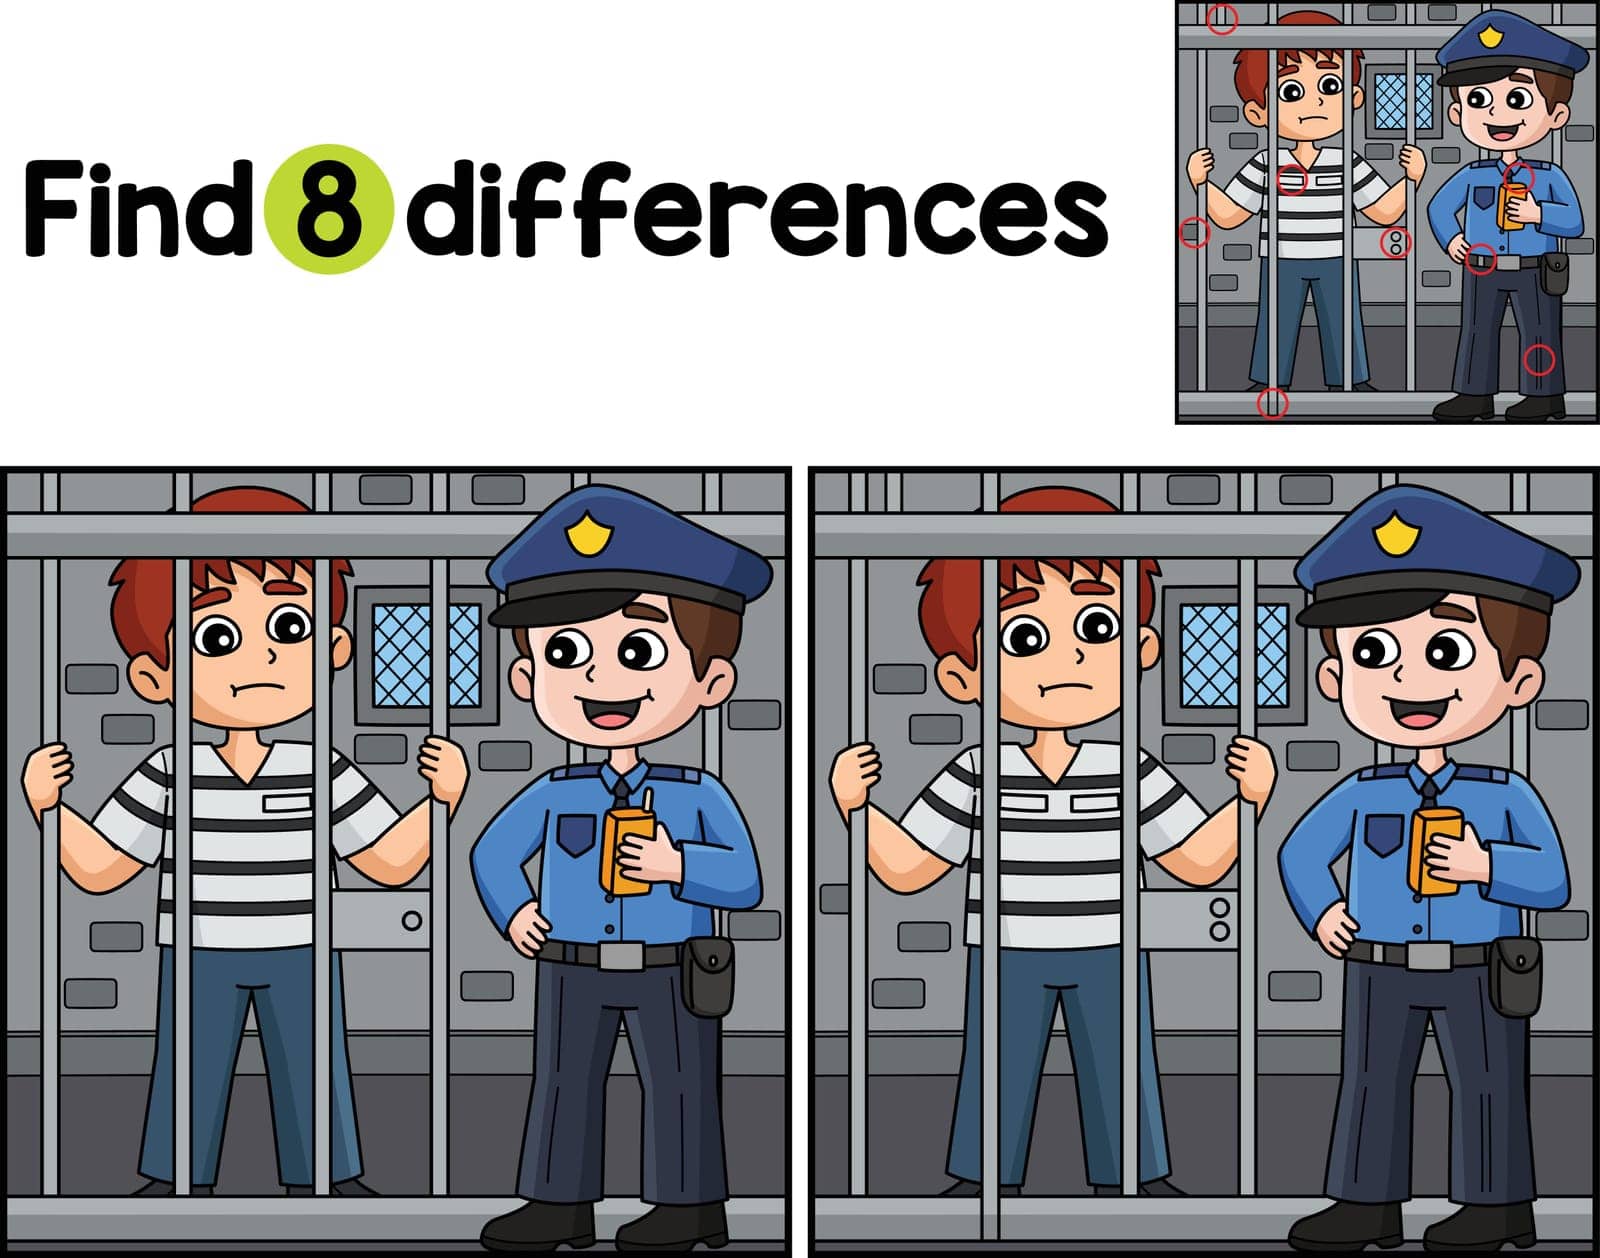 Police Man and Prisoner Find The Differences by abbydesign